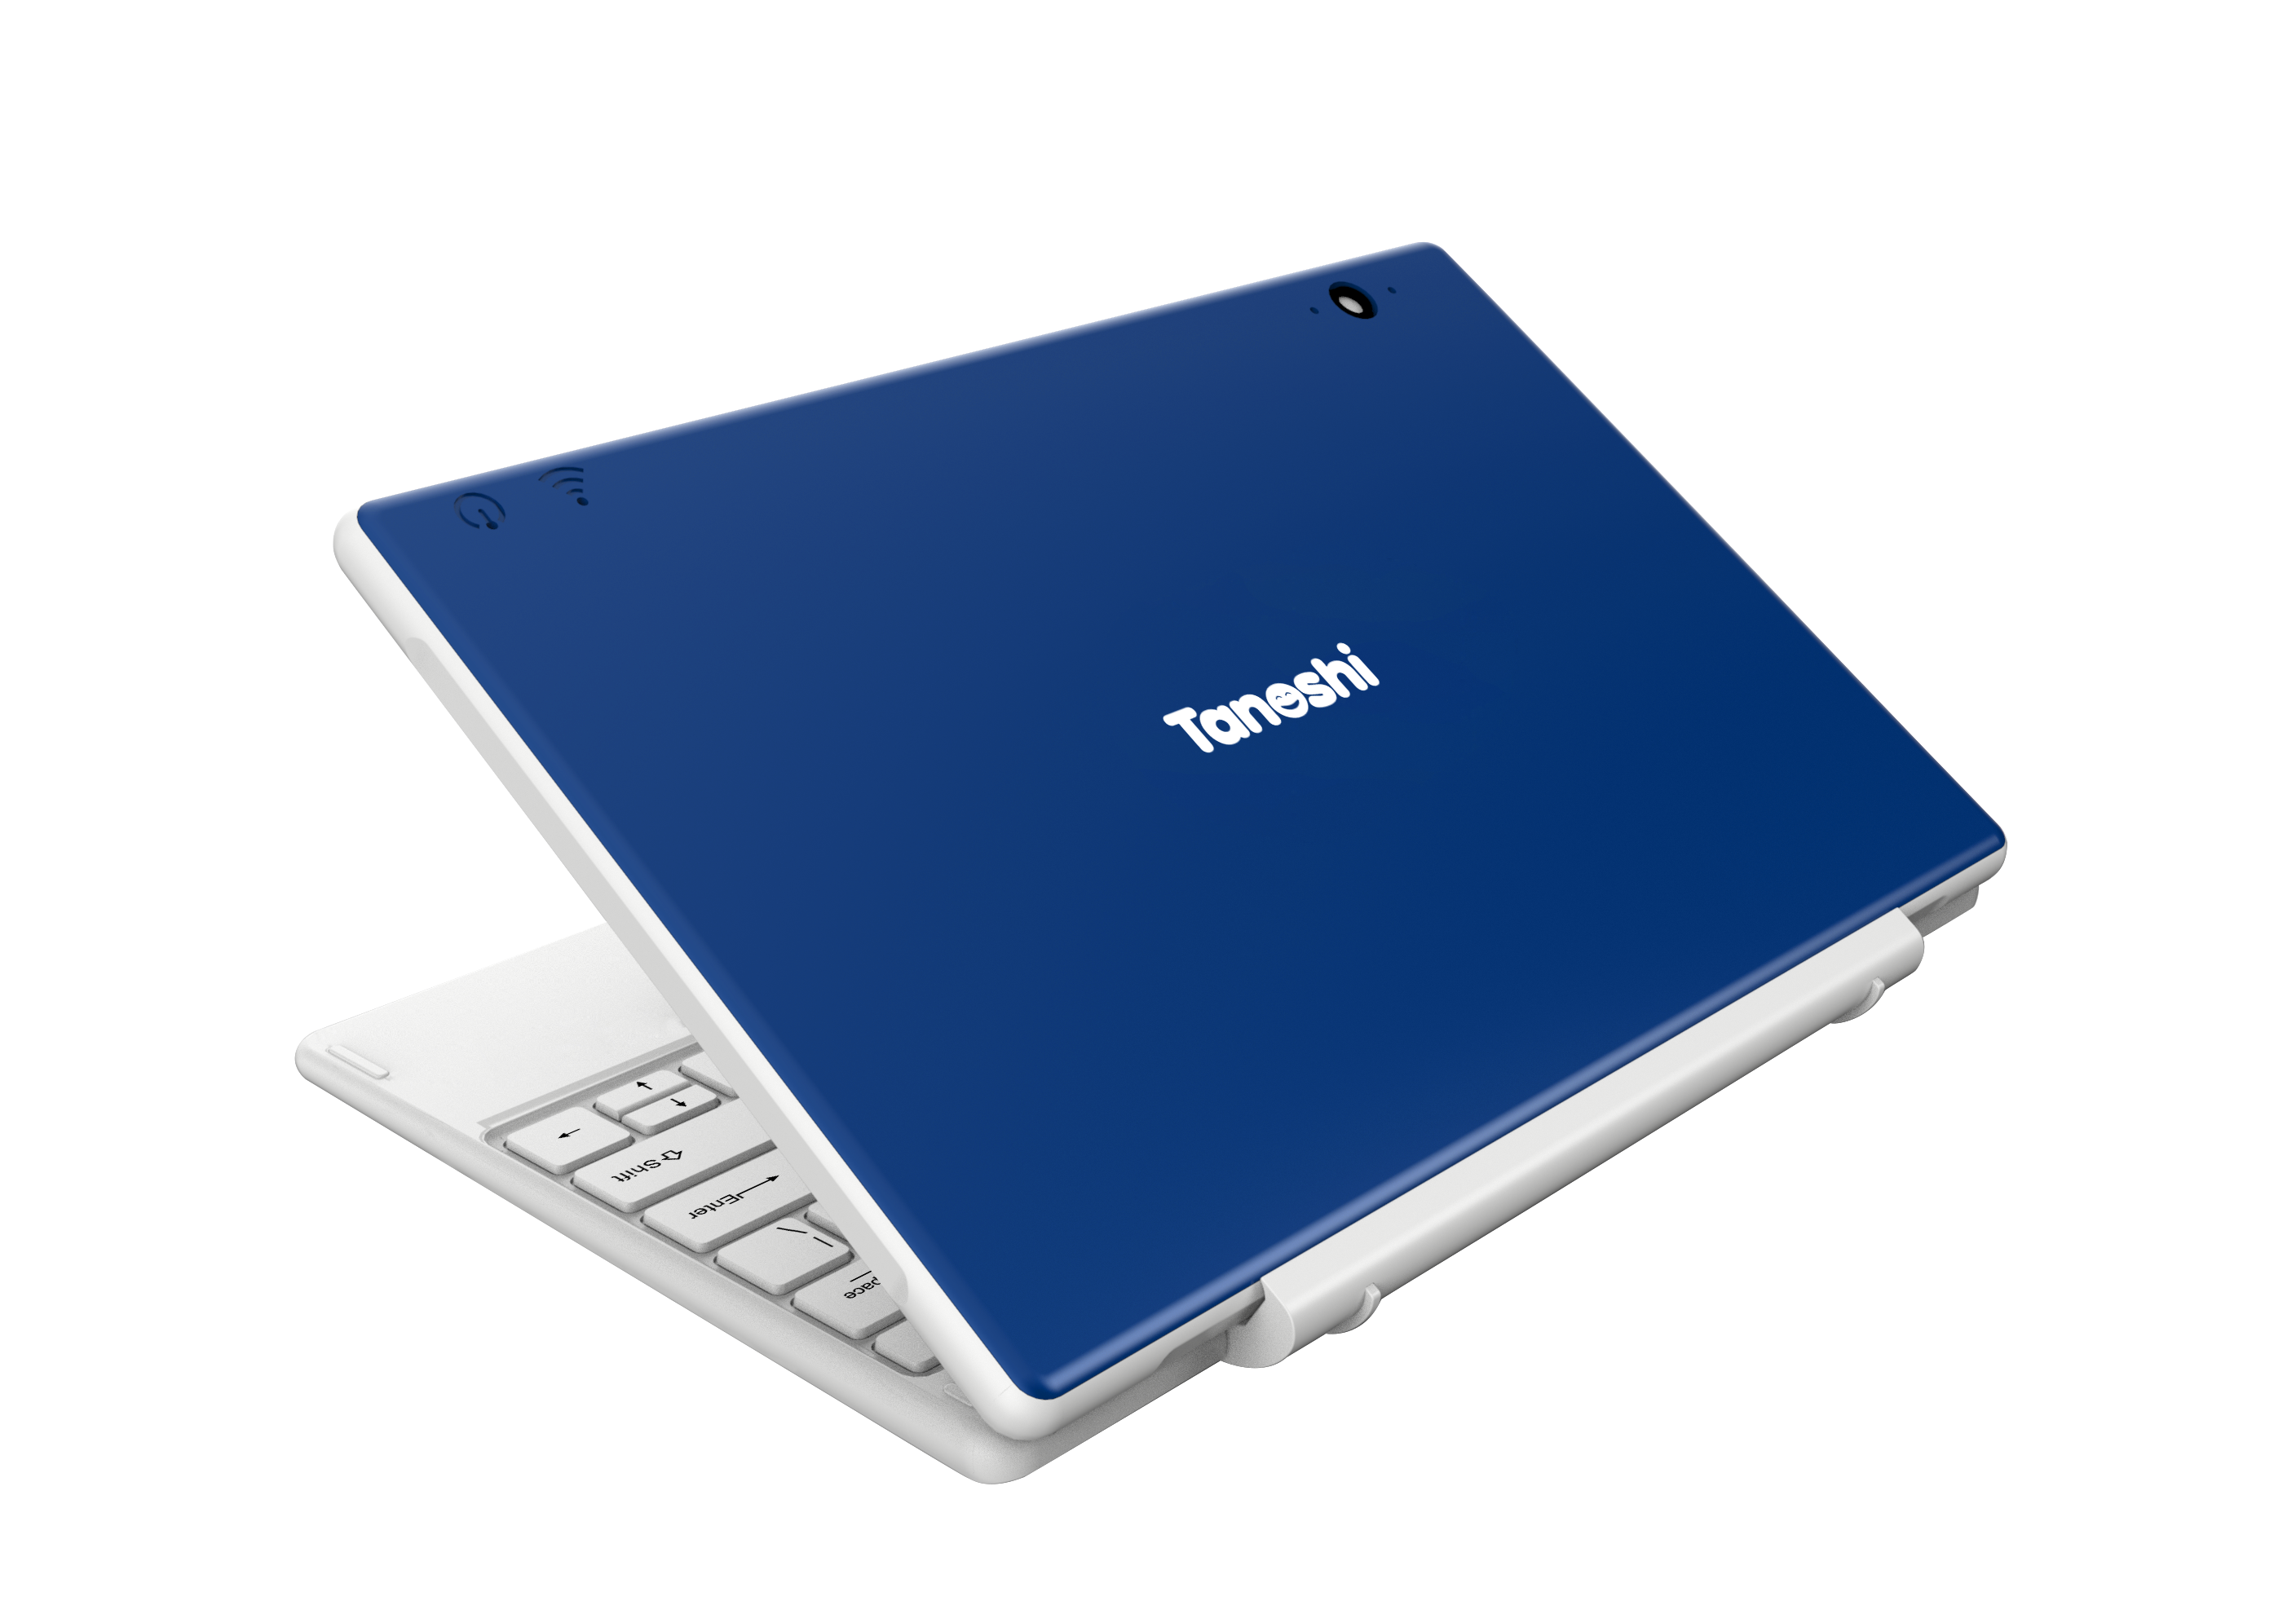 Tanoshi Scholar Kids Computer: a 2-in-1 Kids Android Laptop for Ages 6-12, 10.1" HD Touchscreen Display (Blue) - image 3 of 10